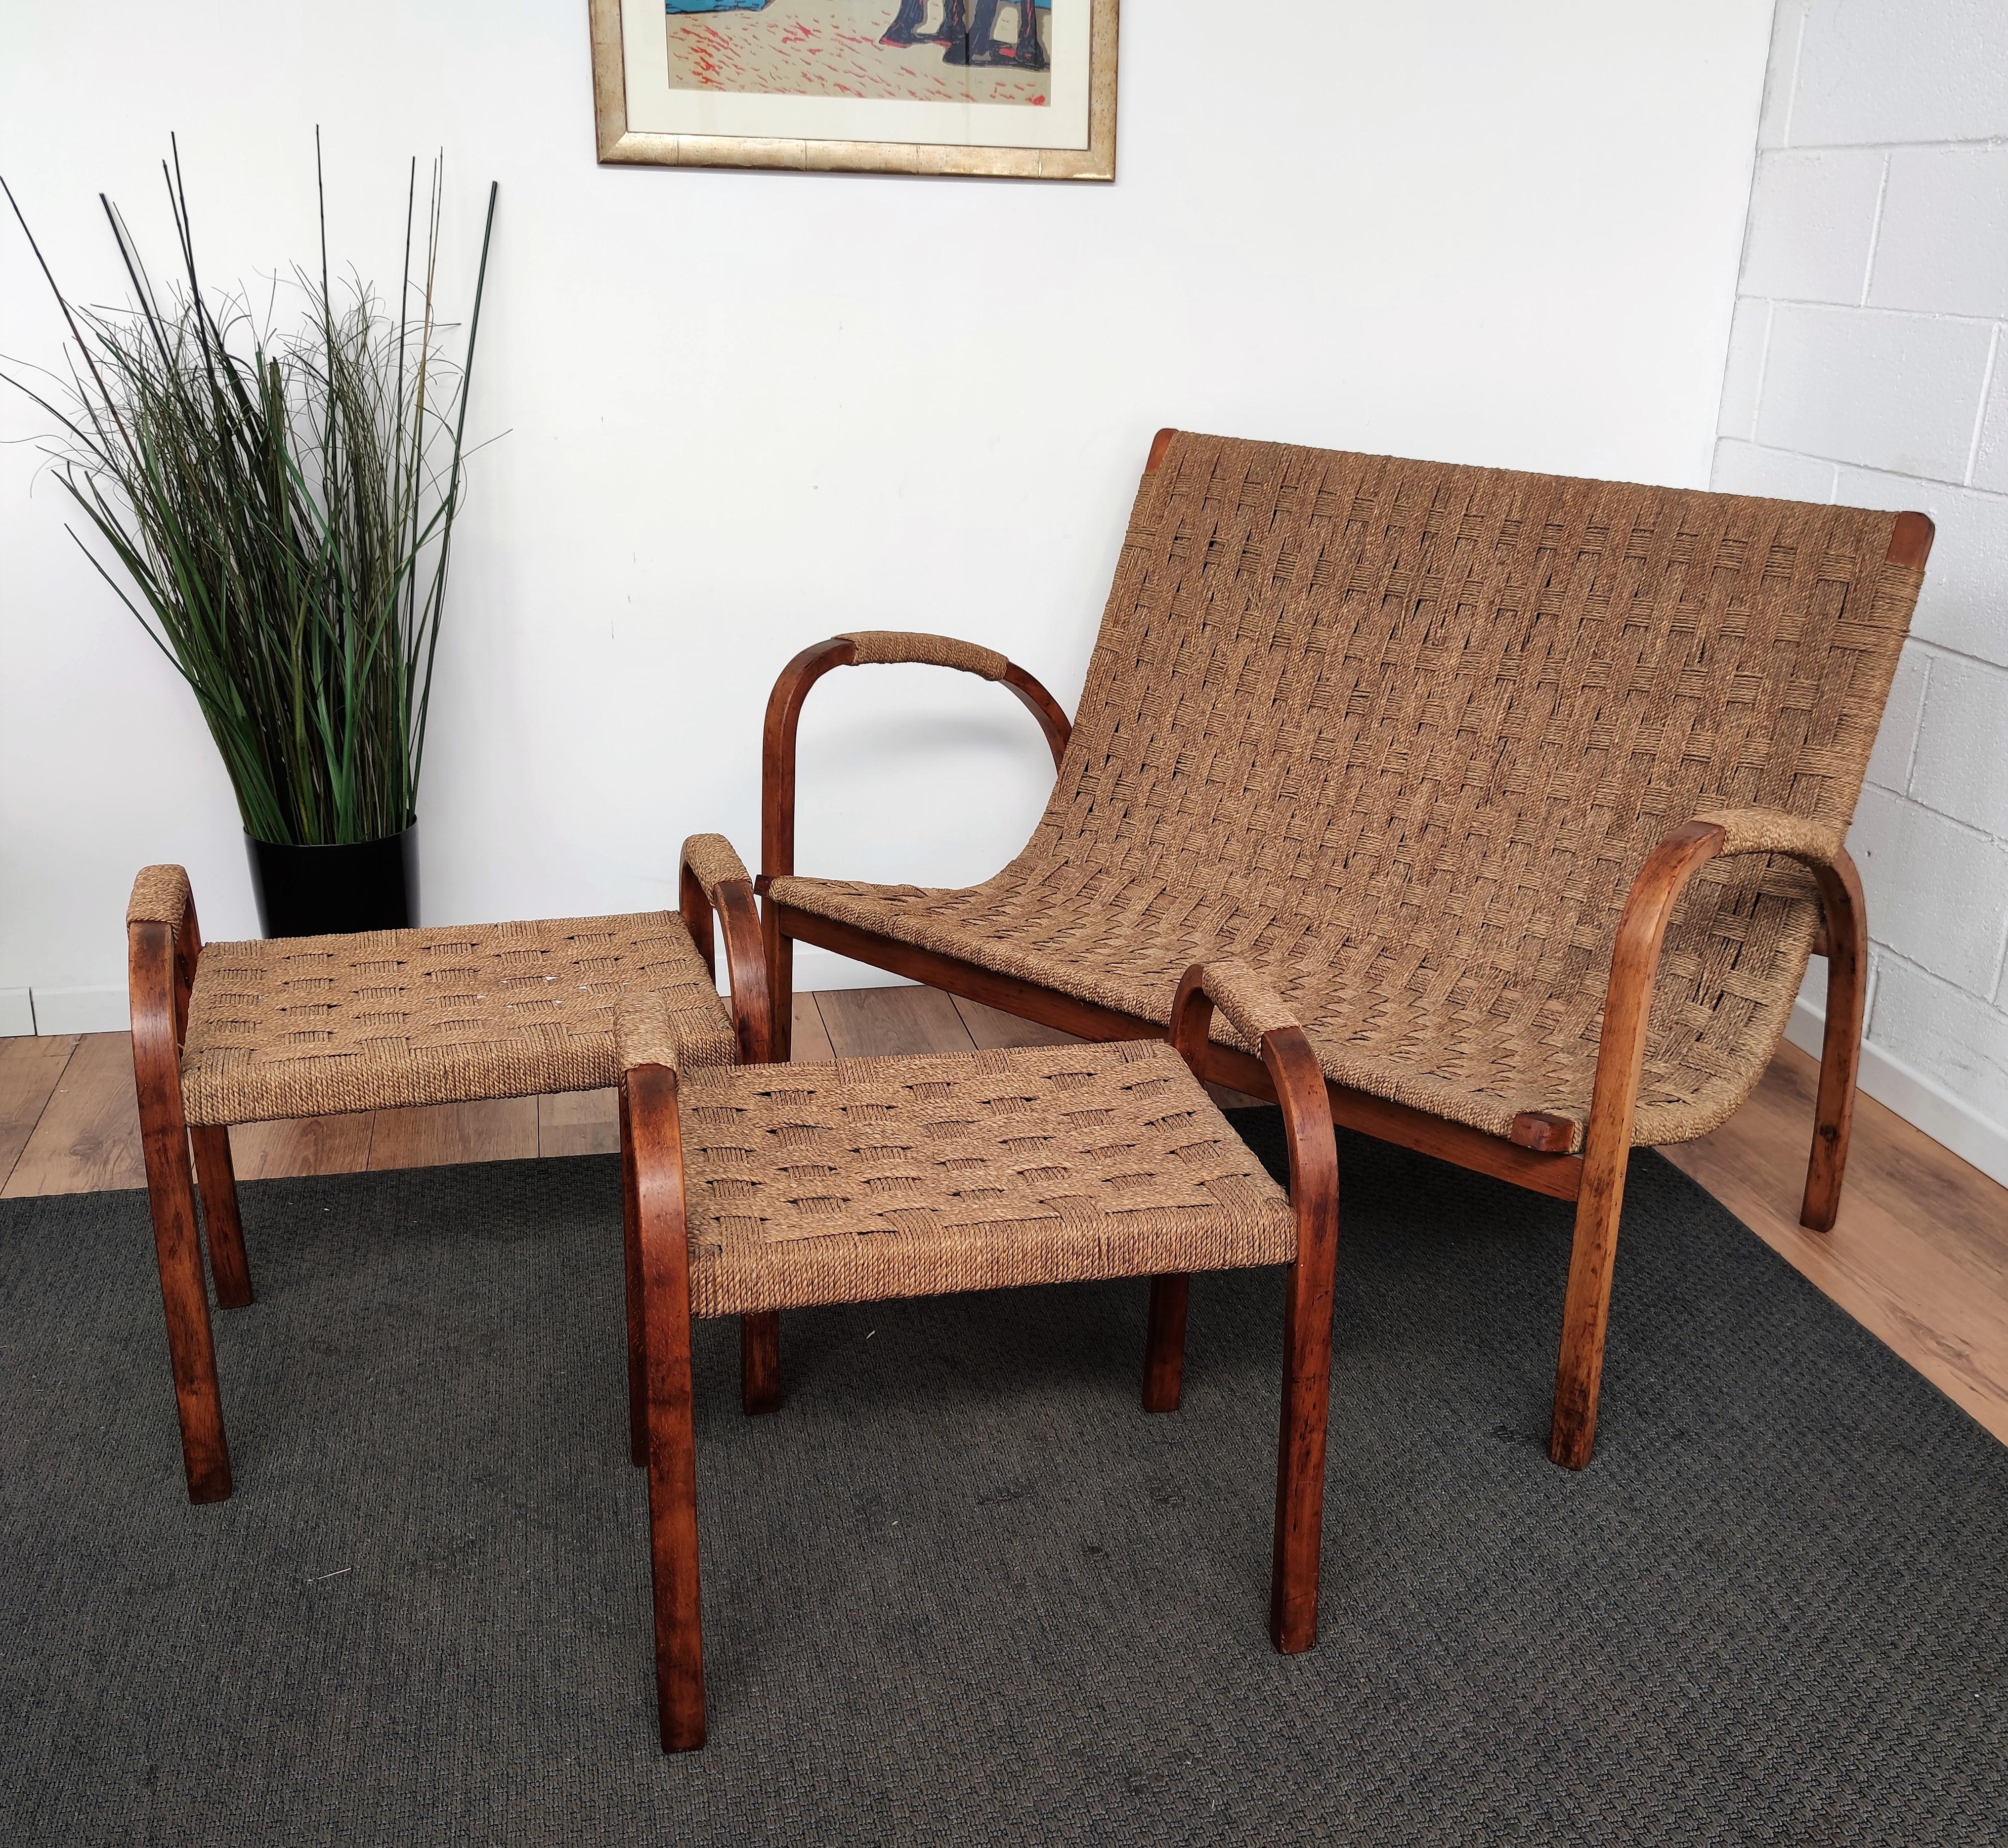 Stylish 19060s Mid-Century Modern lounge bench armchair in wood and cord or woven rope, in the style of Audoux Minet. The design and shape of the wooden structure, typical of Mid-Century Modern style, perfectly complements with the pattern and